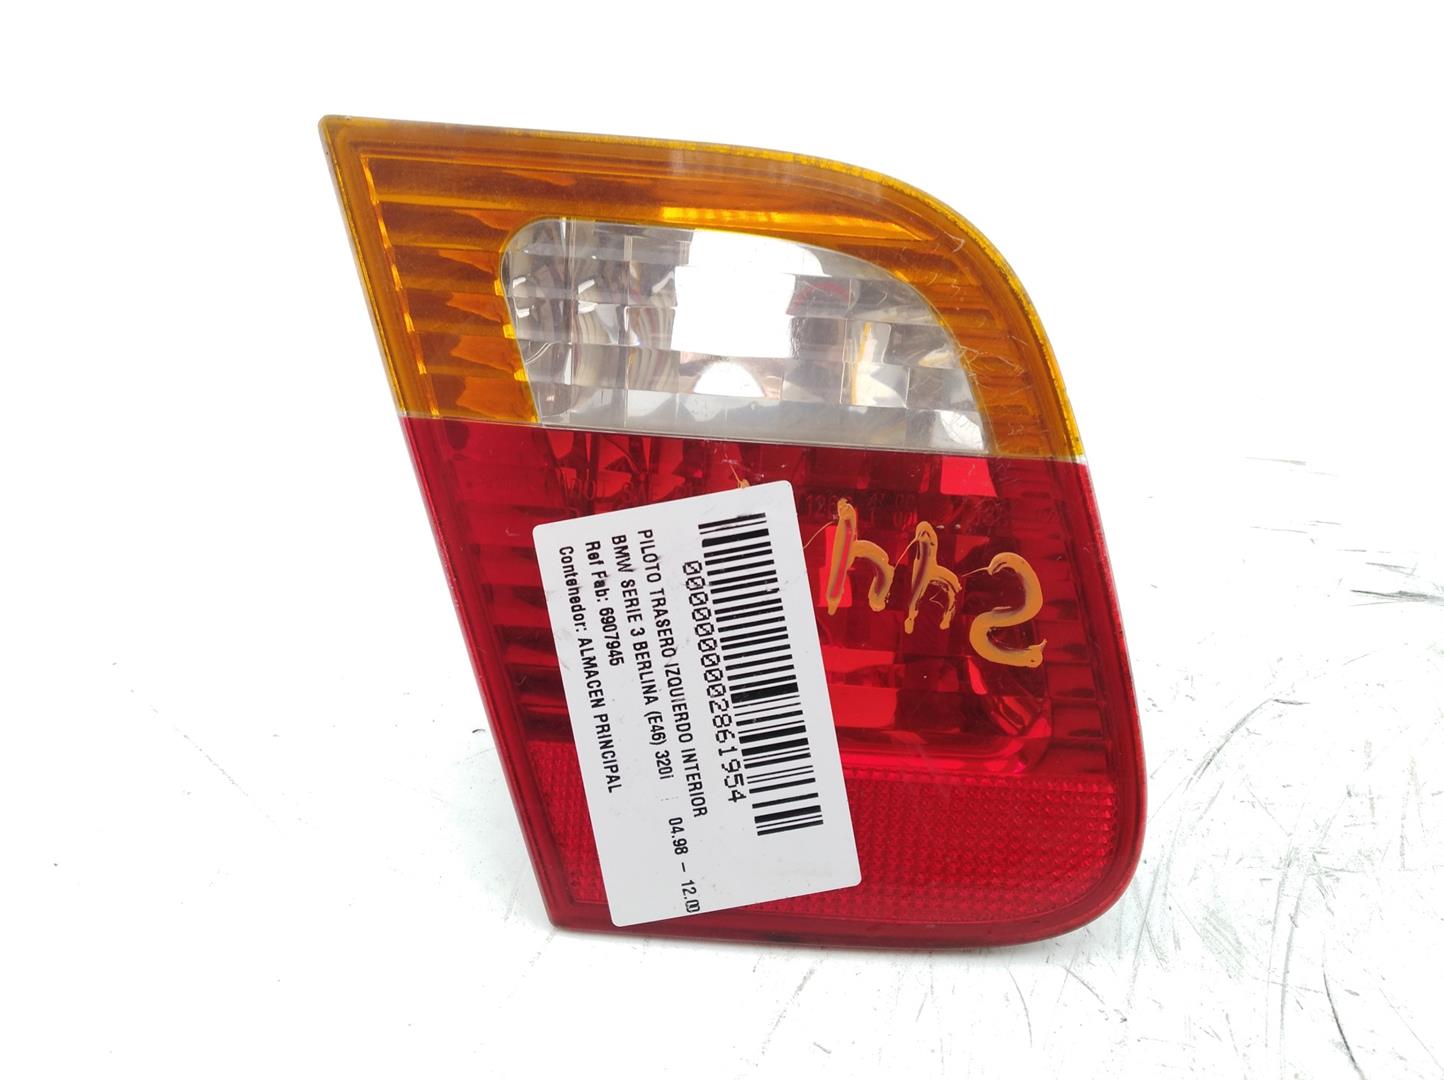 BMW 3 Series E46 (1997-2006) Rear Left Taillight 6907945, 6907945, 6907945 24667379